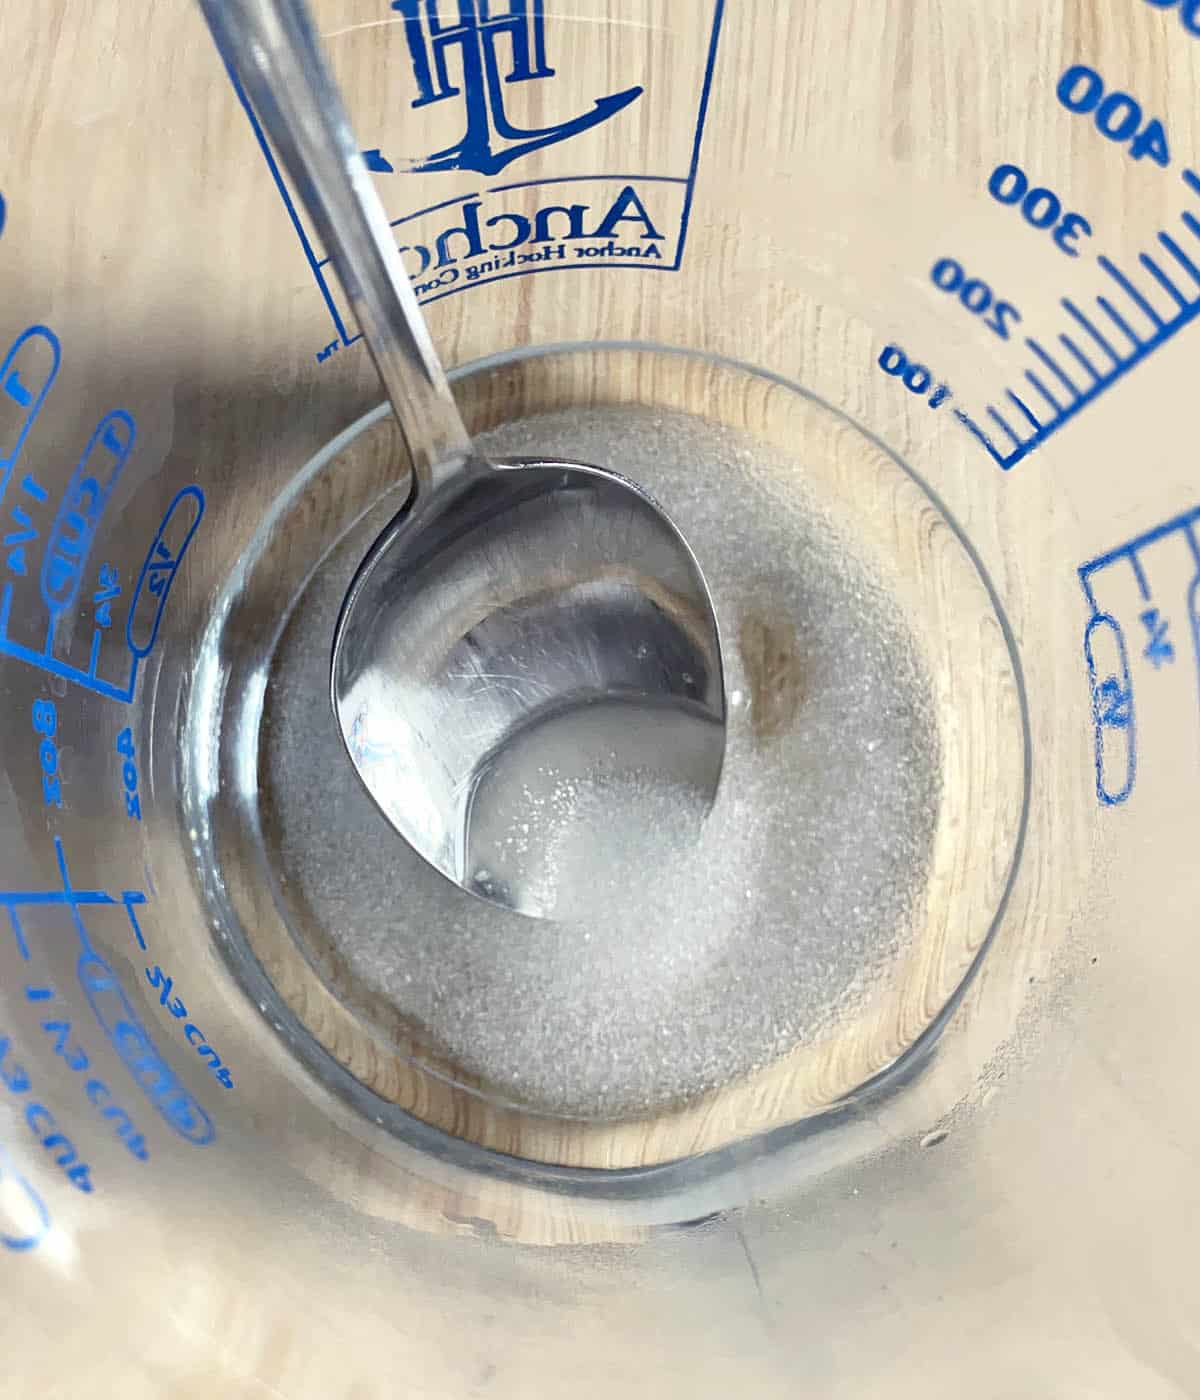 A glass measuring cup containing a clear liquid, sugar, and a spoon.